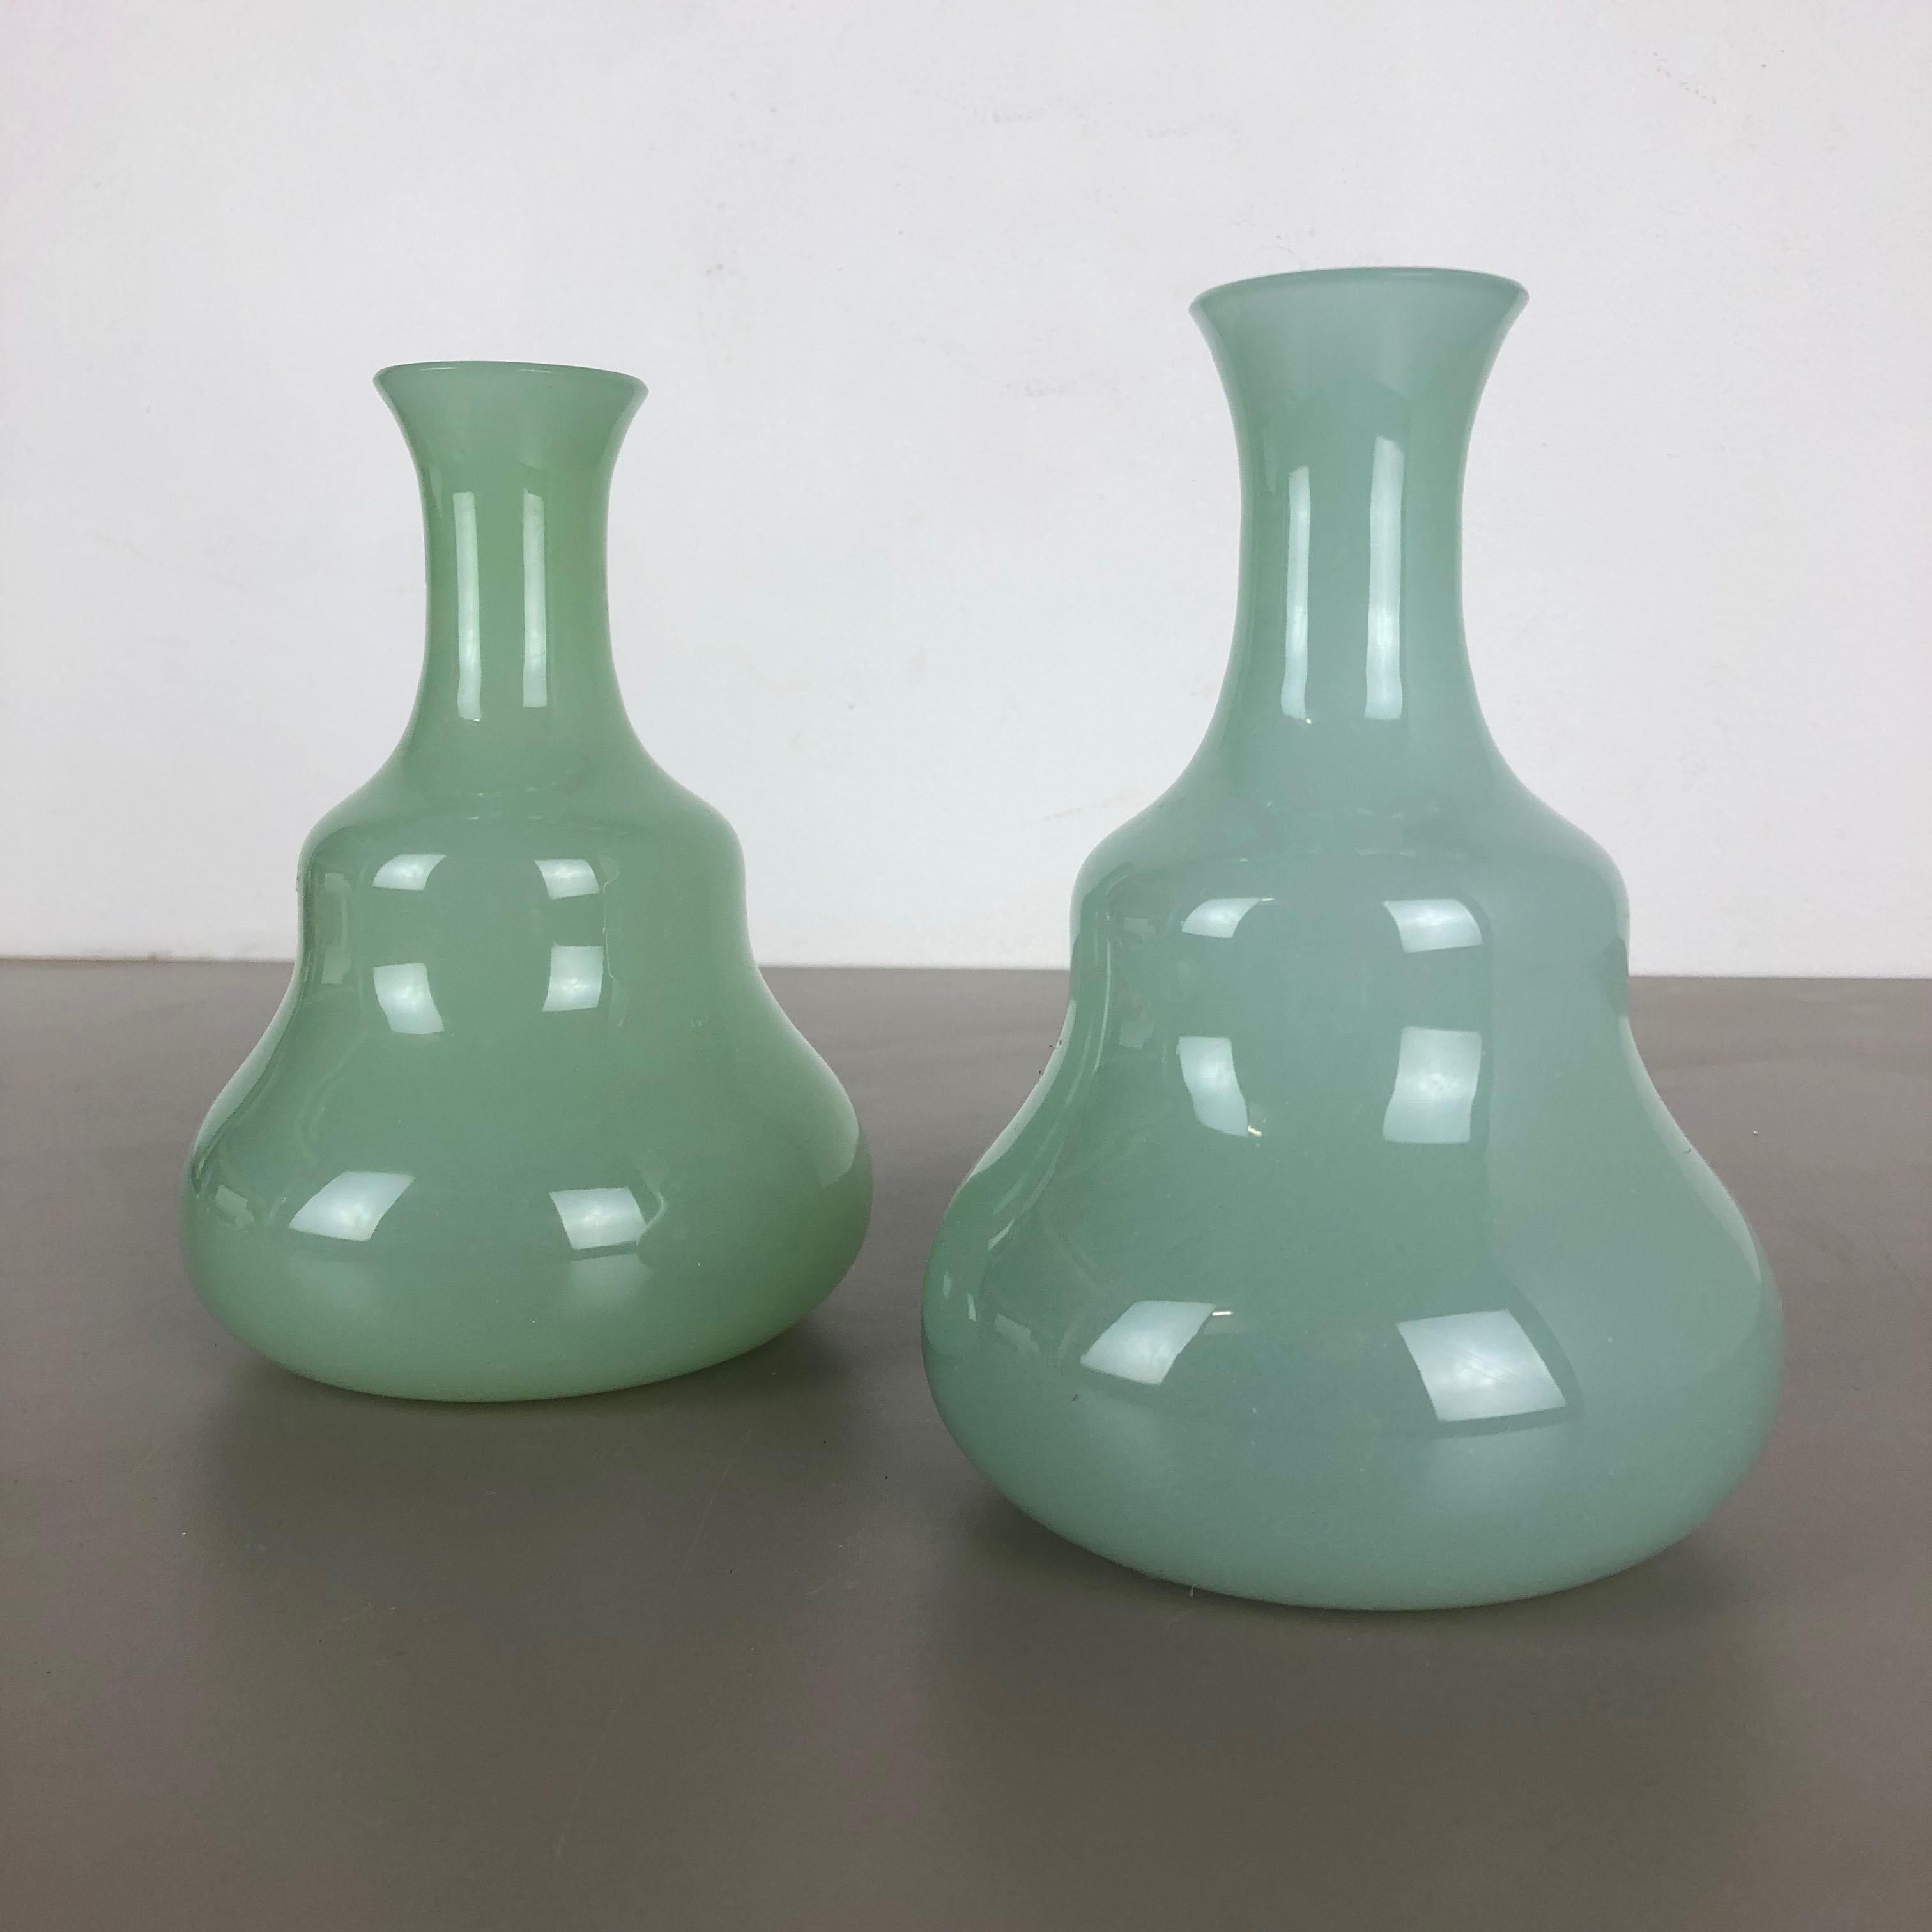 Set of 2 New Old Stock Murano Opaline Glass Vases by Gino Cenedese, 1960s (Italienisch)